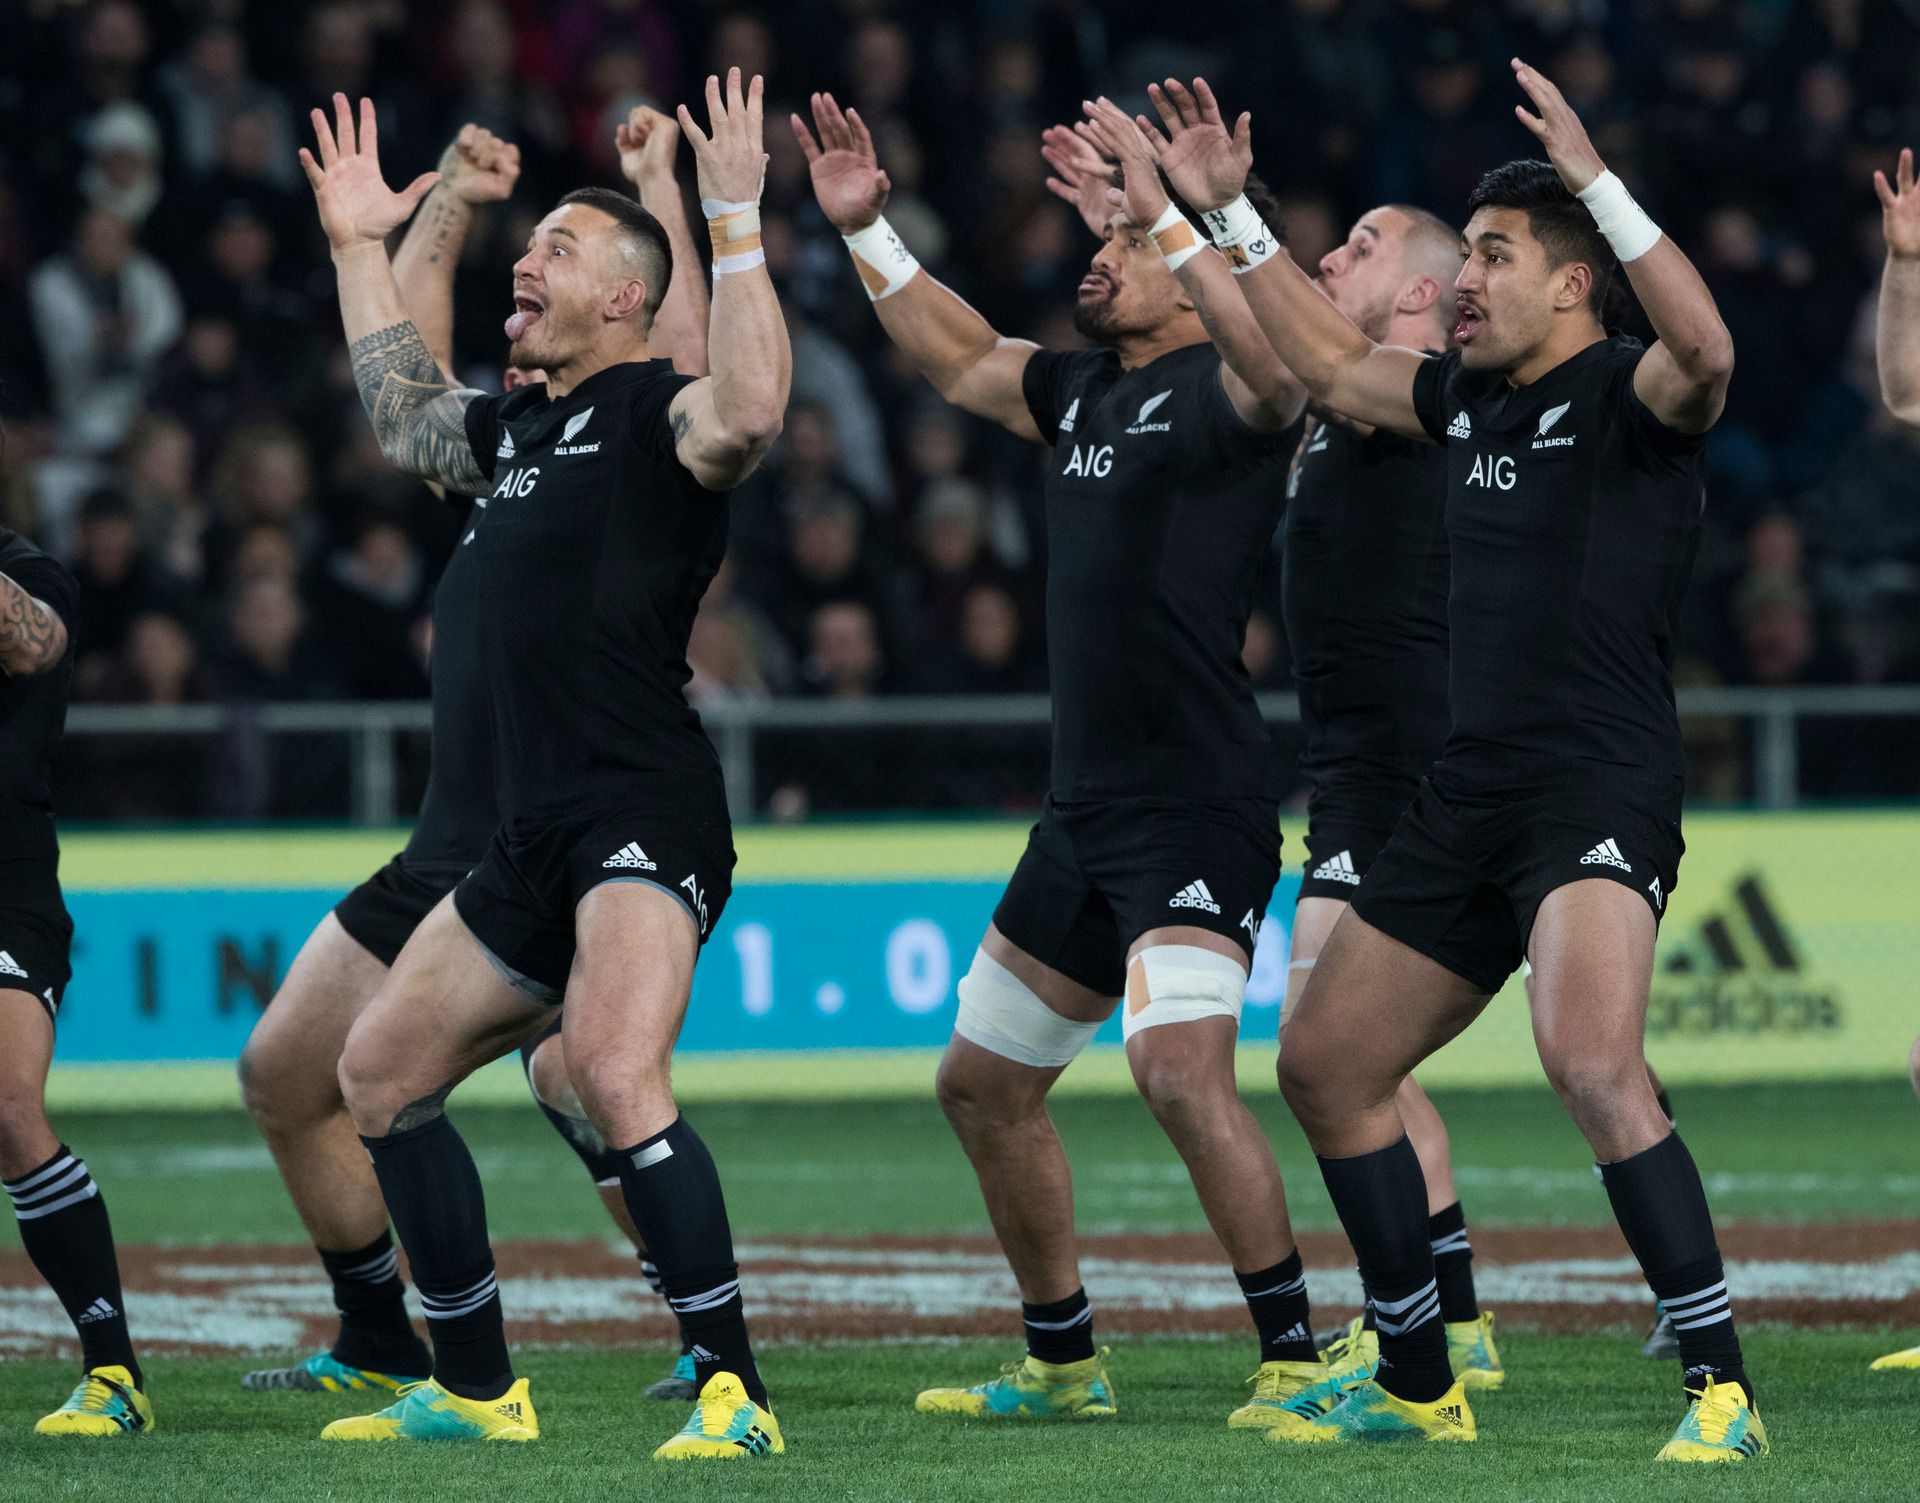 Misuse of haka Ka Mate 'tramples' on mana, call for greater protection in New Zealand and overseas - NZ